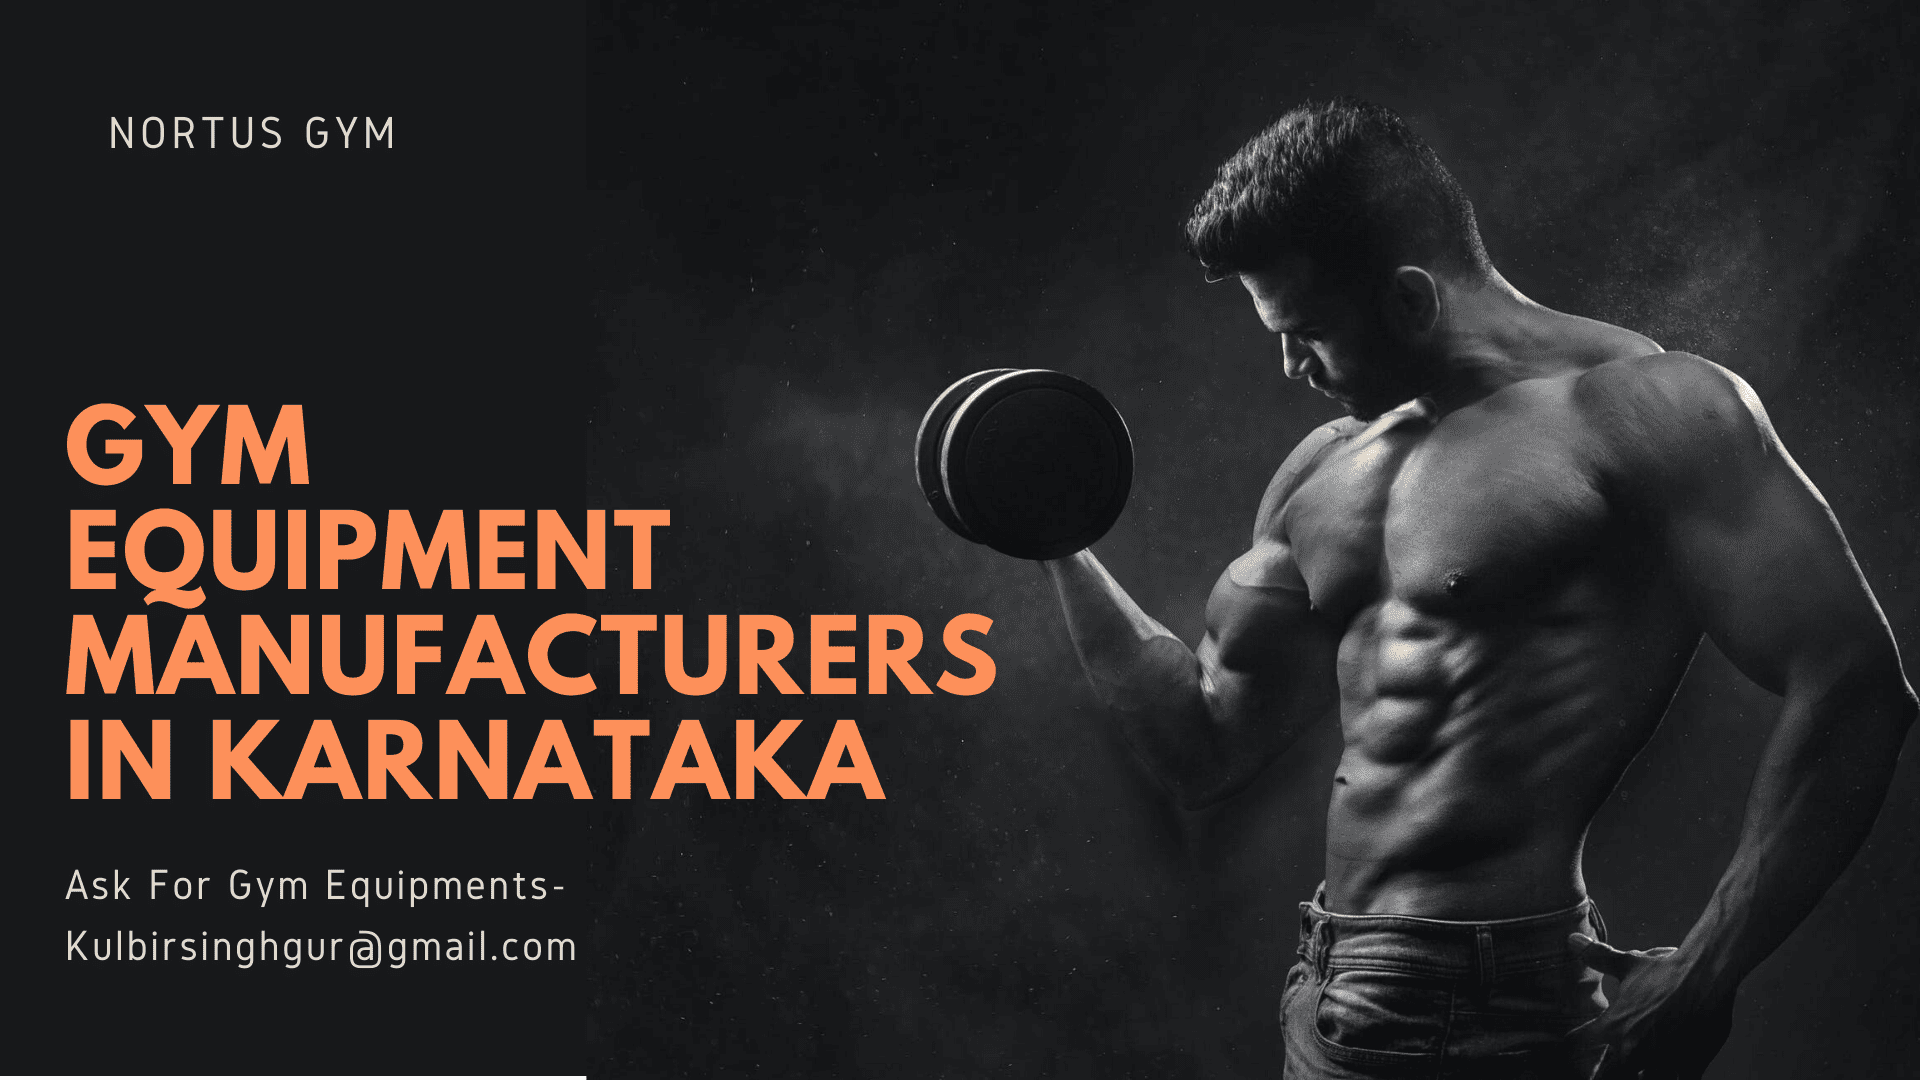 Buy Quality Equipment From The Best Gym Equipment Manufacturers in Karnataka